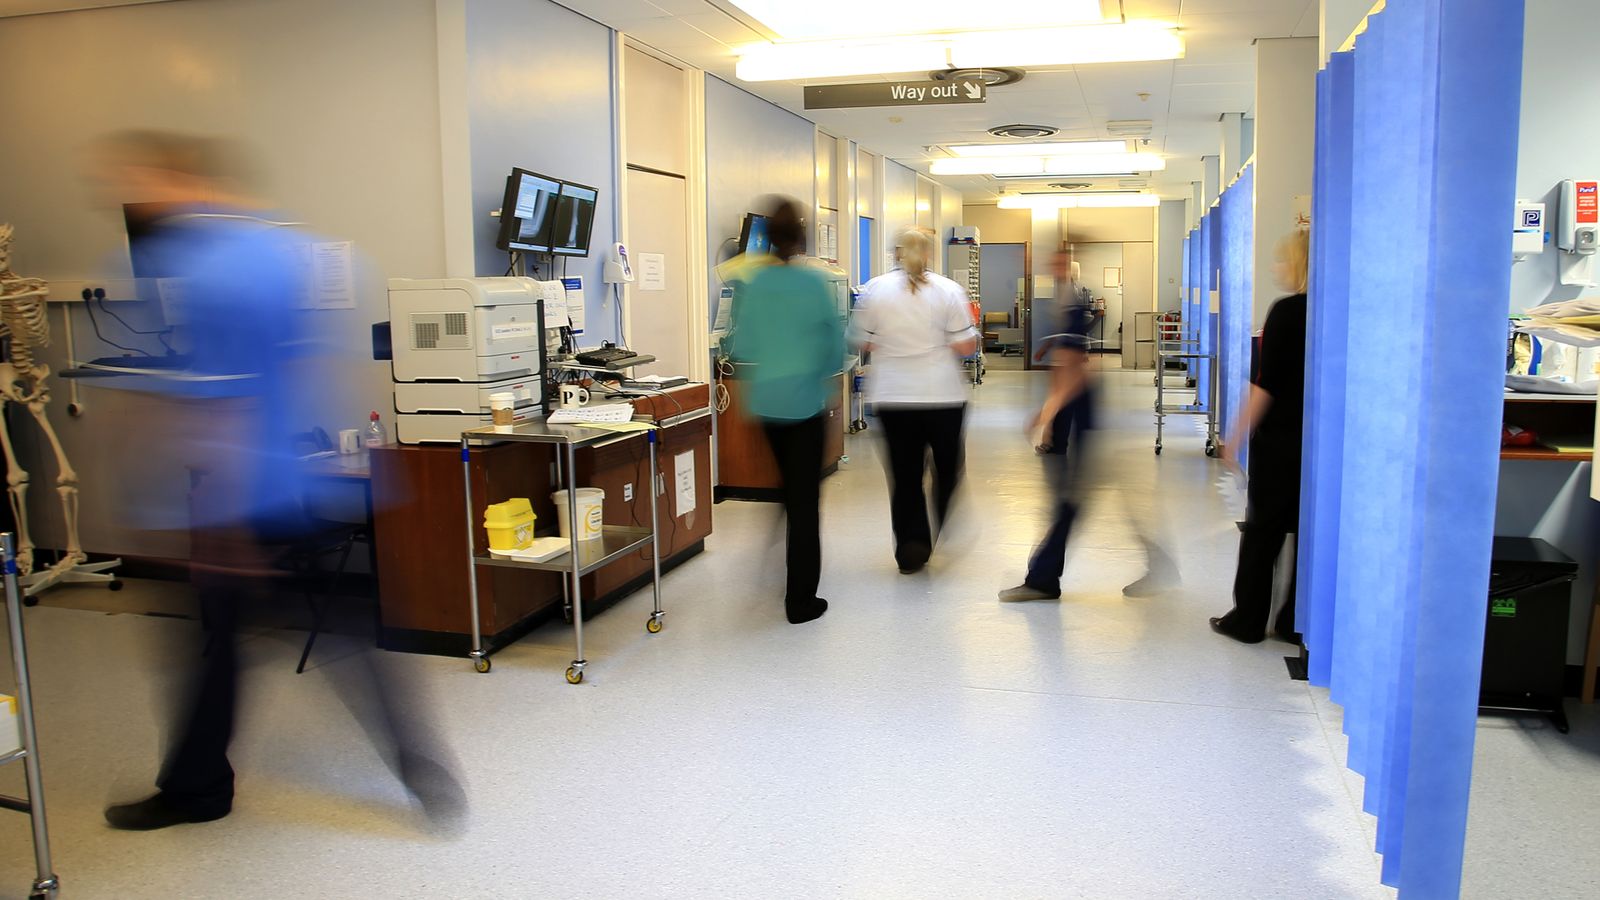 Bodies left to decompose in NHS hospitals, report finds